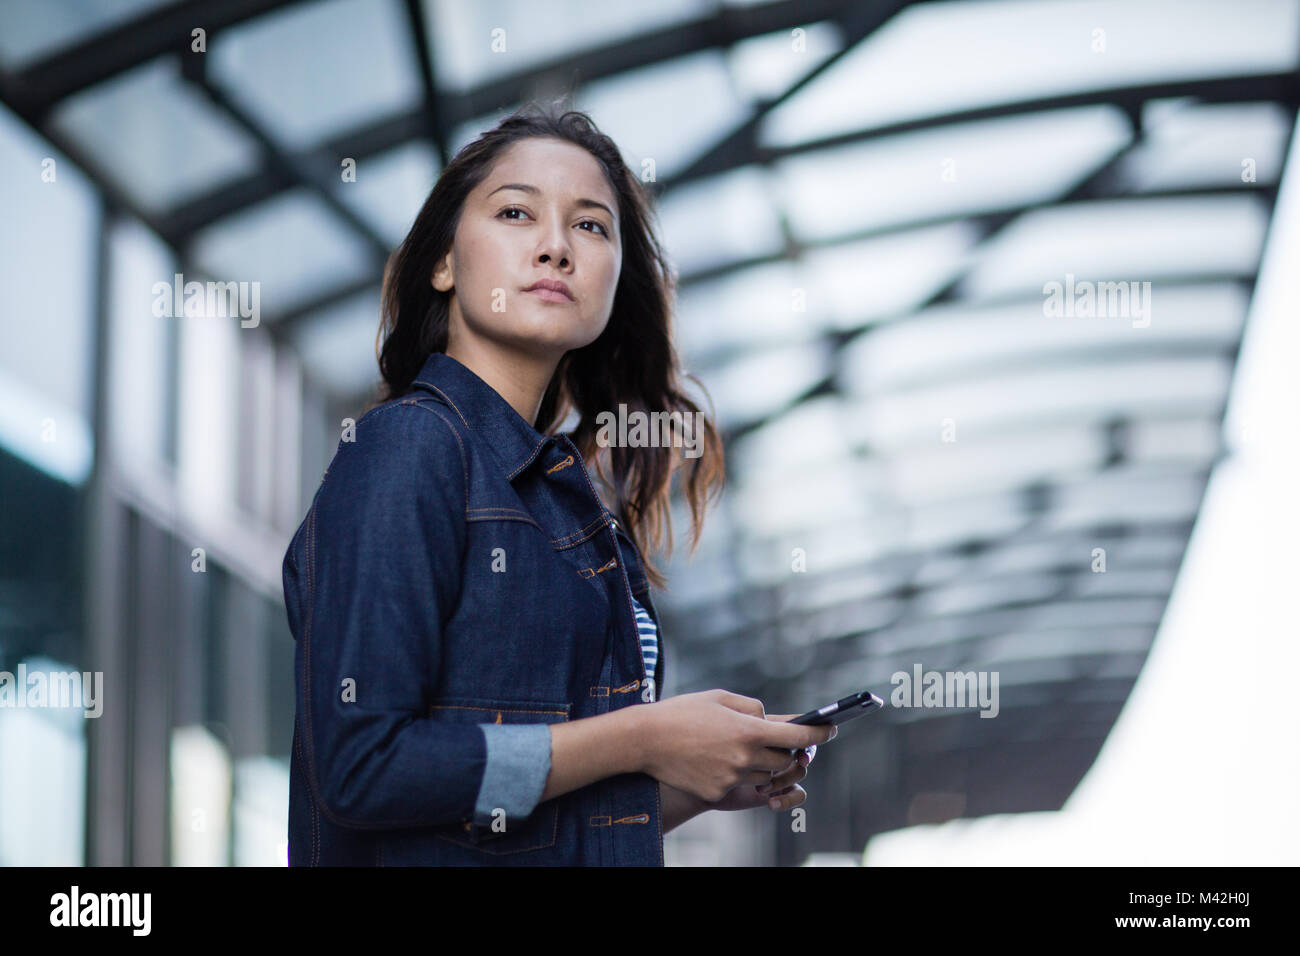 Young adult waiting on station platform Stock Photo